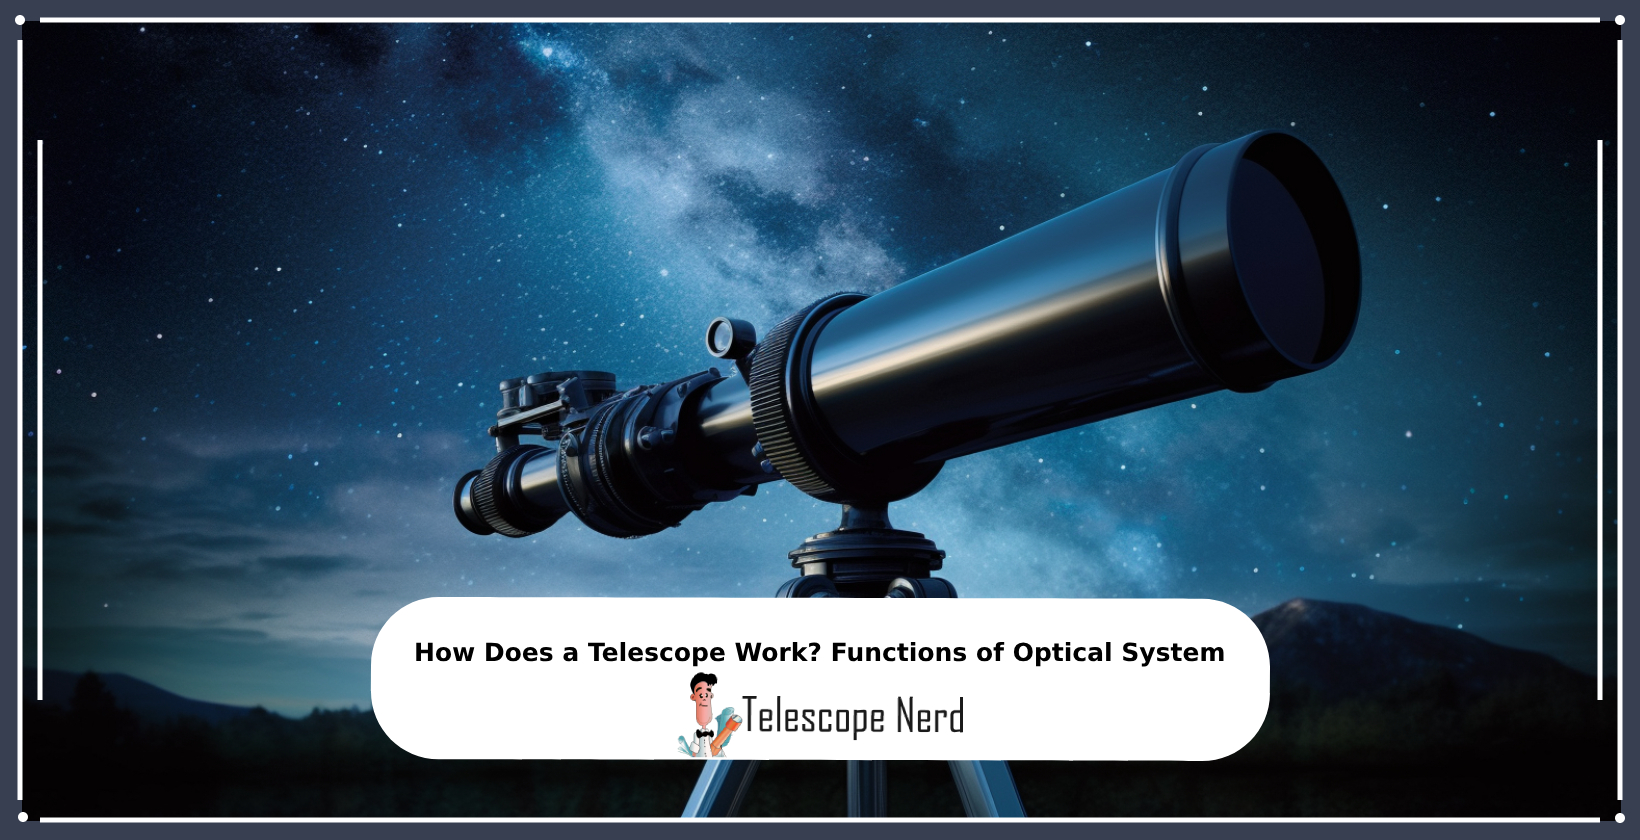 How Does a Telescope Work? Functions of Optical System